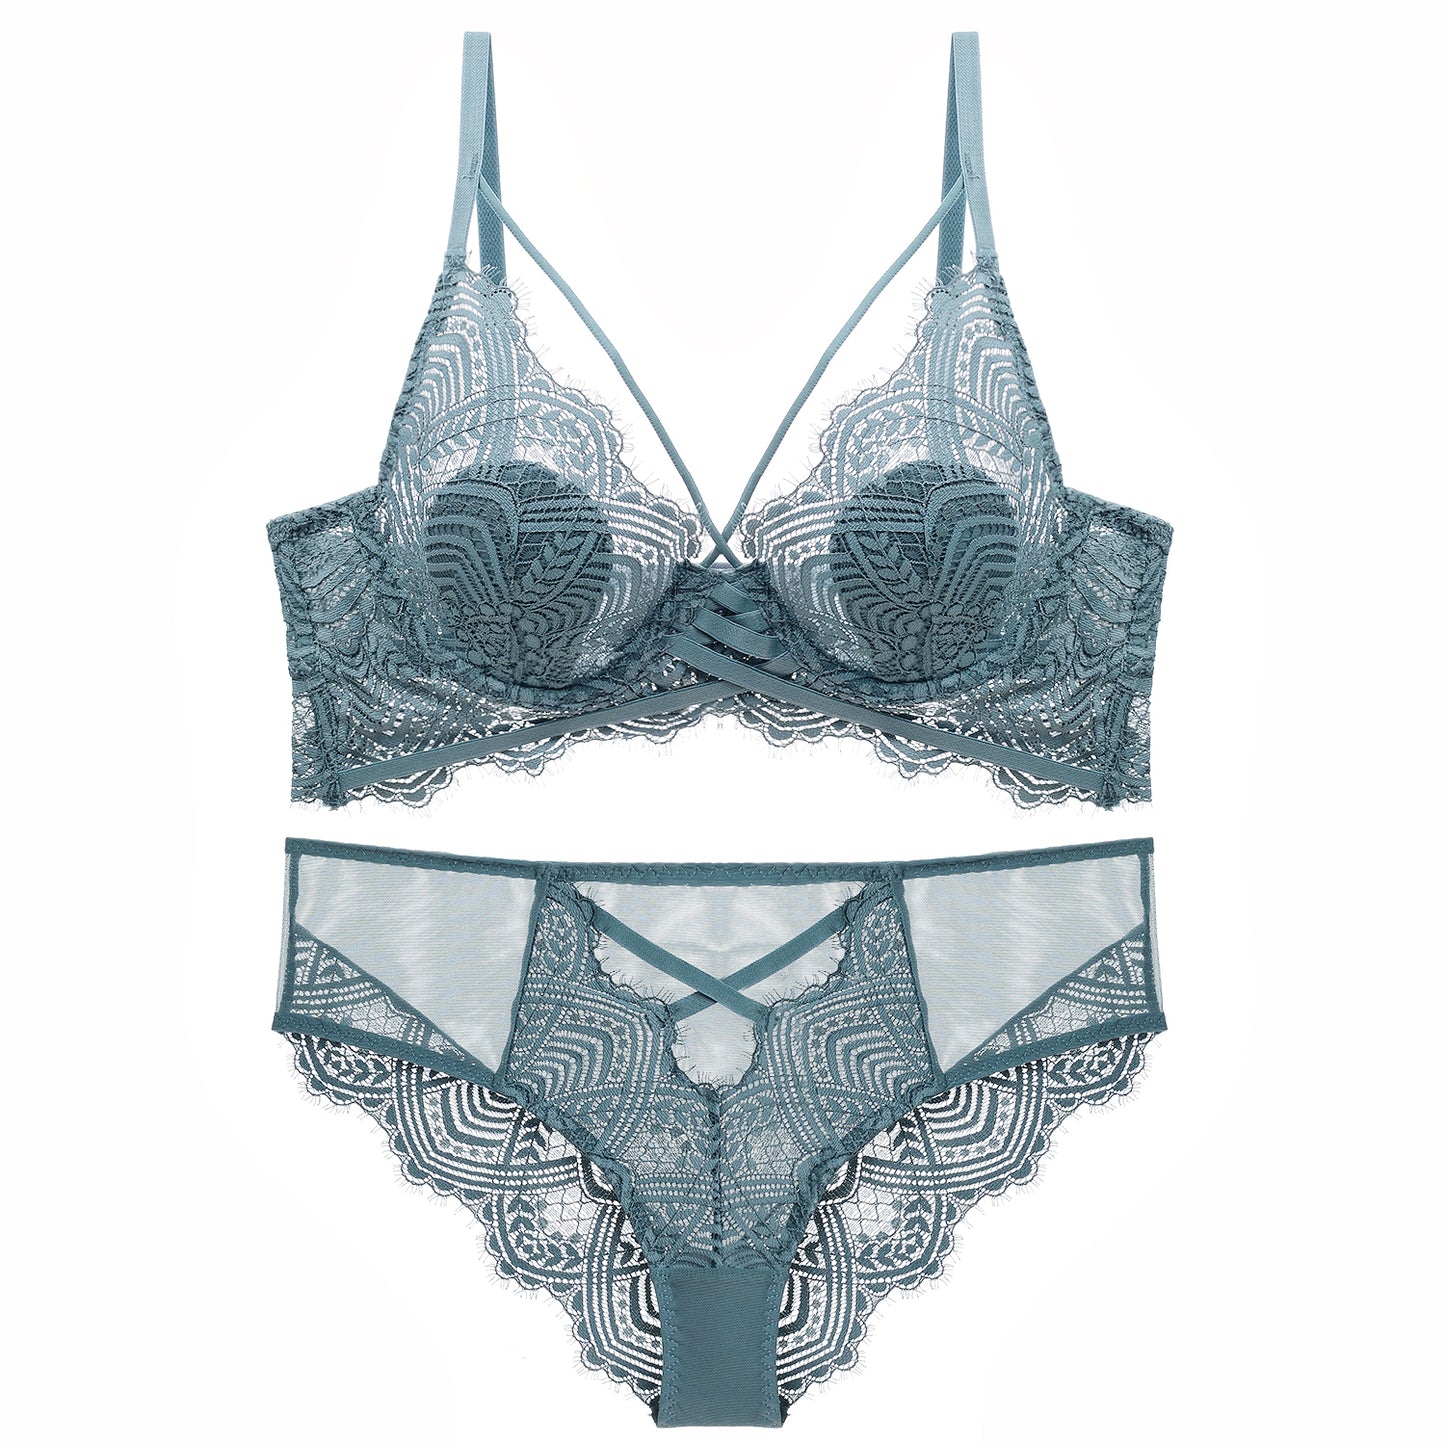 partially lined bra lace lingerie set gray blue